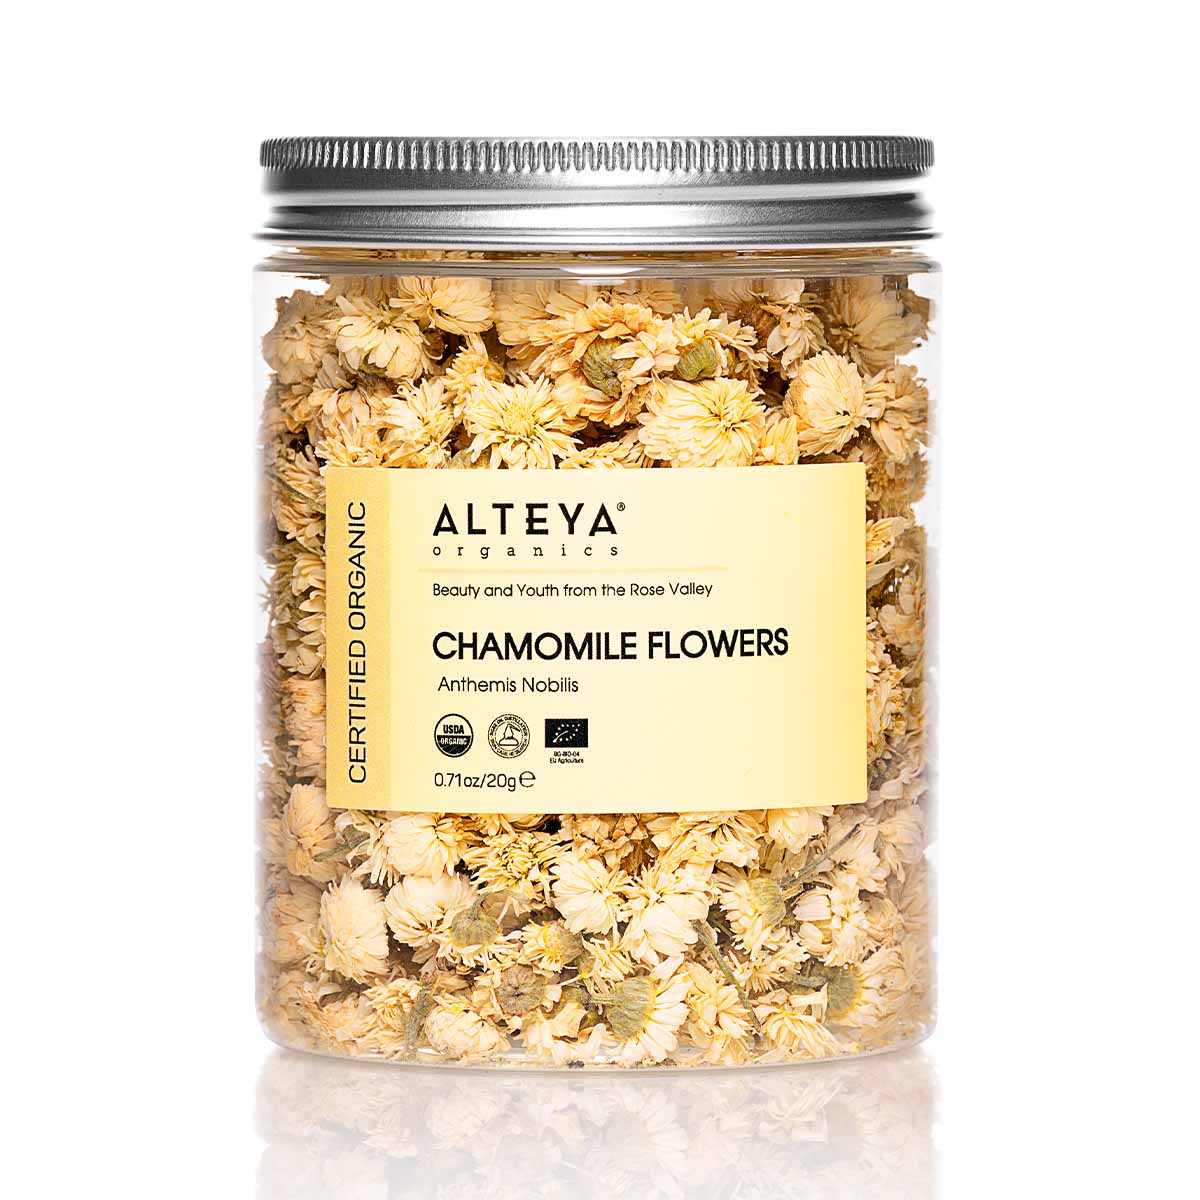 A jar of Alteya Organics Chamomile Flowers, known for its healing properties and commonly used in tea, on a white background.